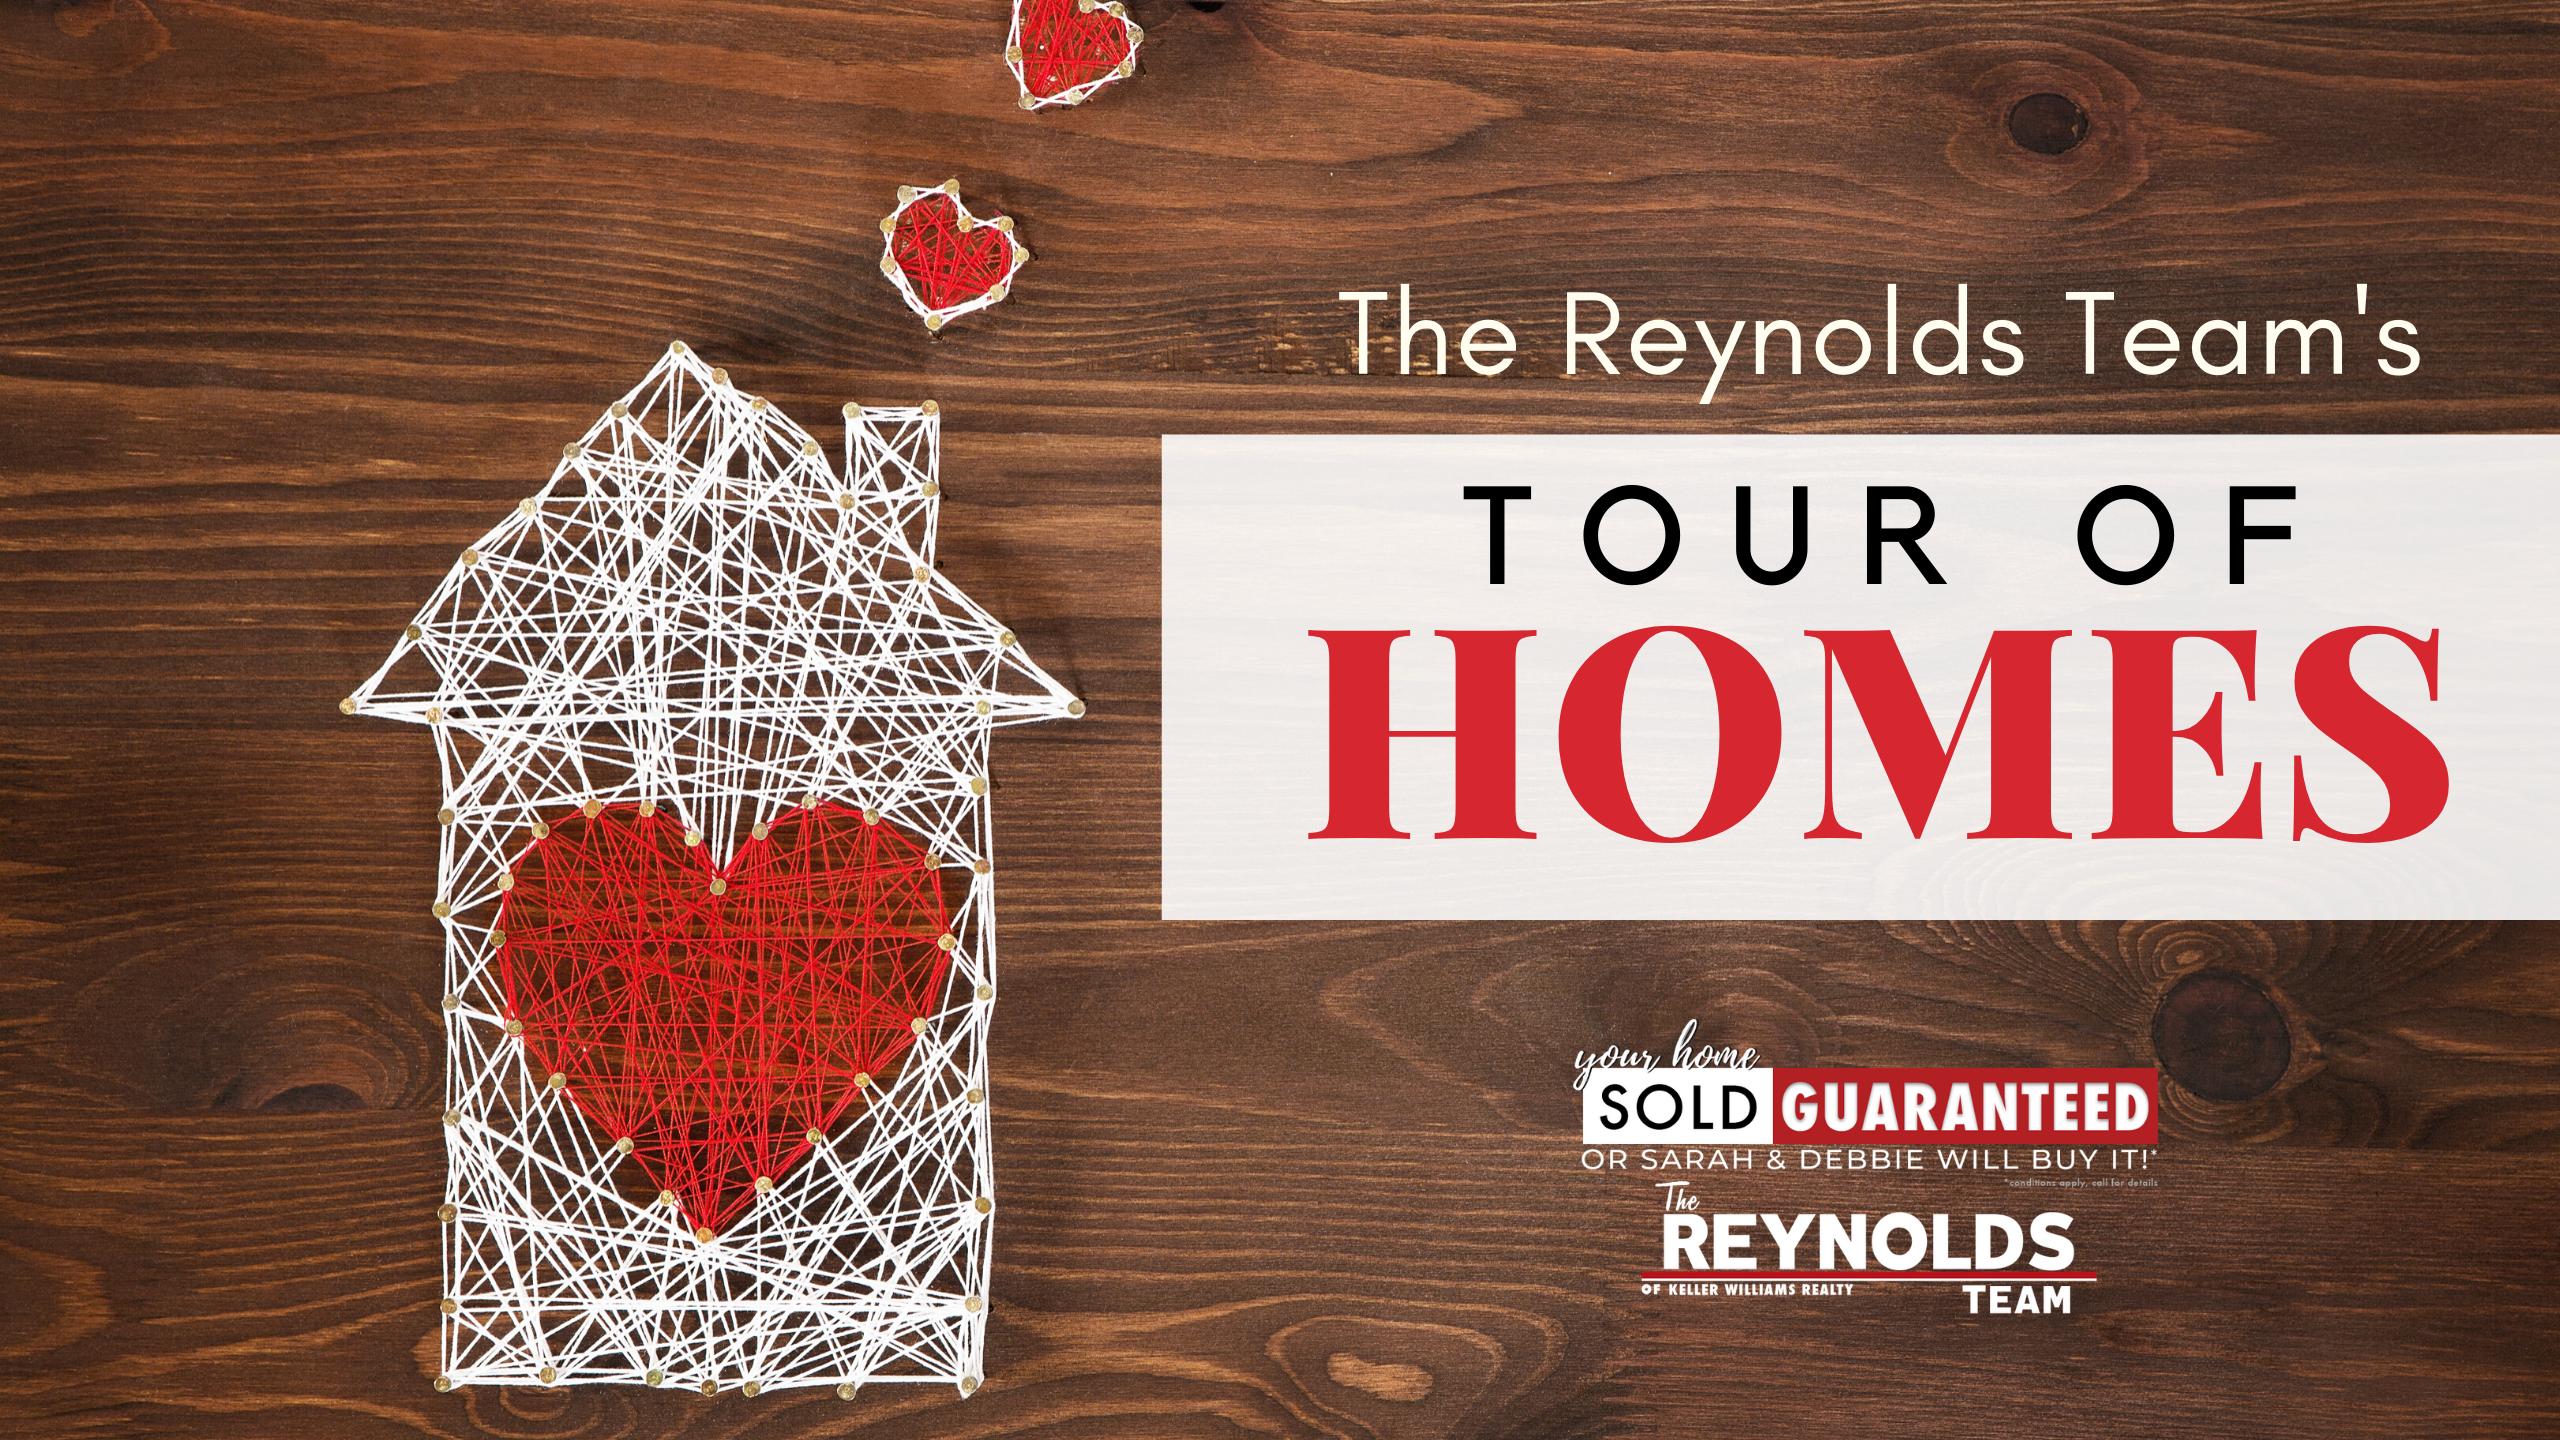 Tour of Homes June 20th to 21st